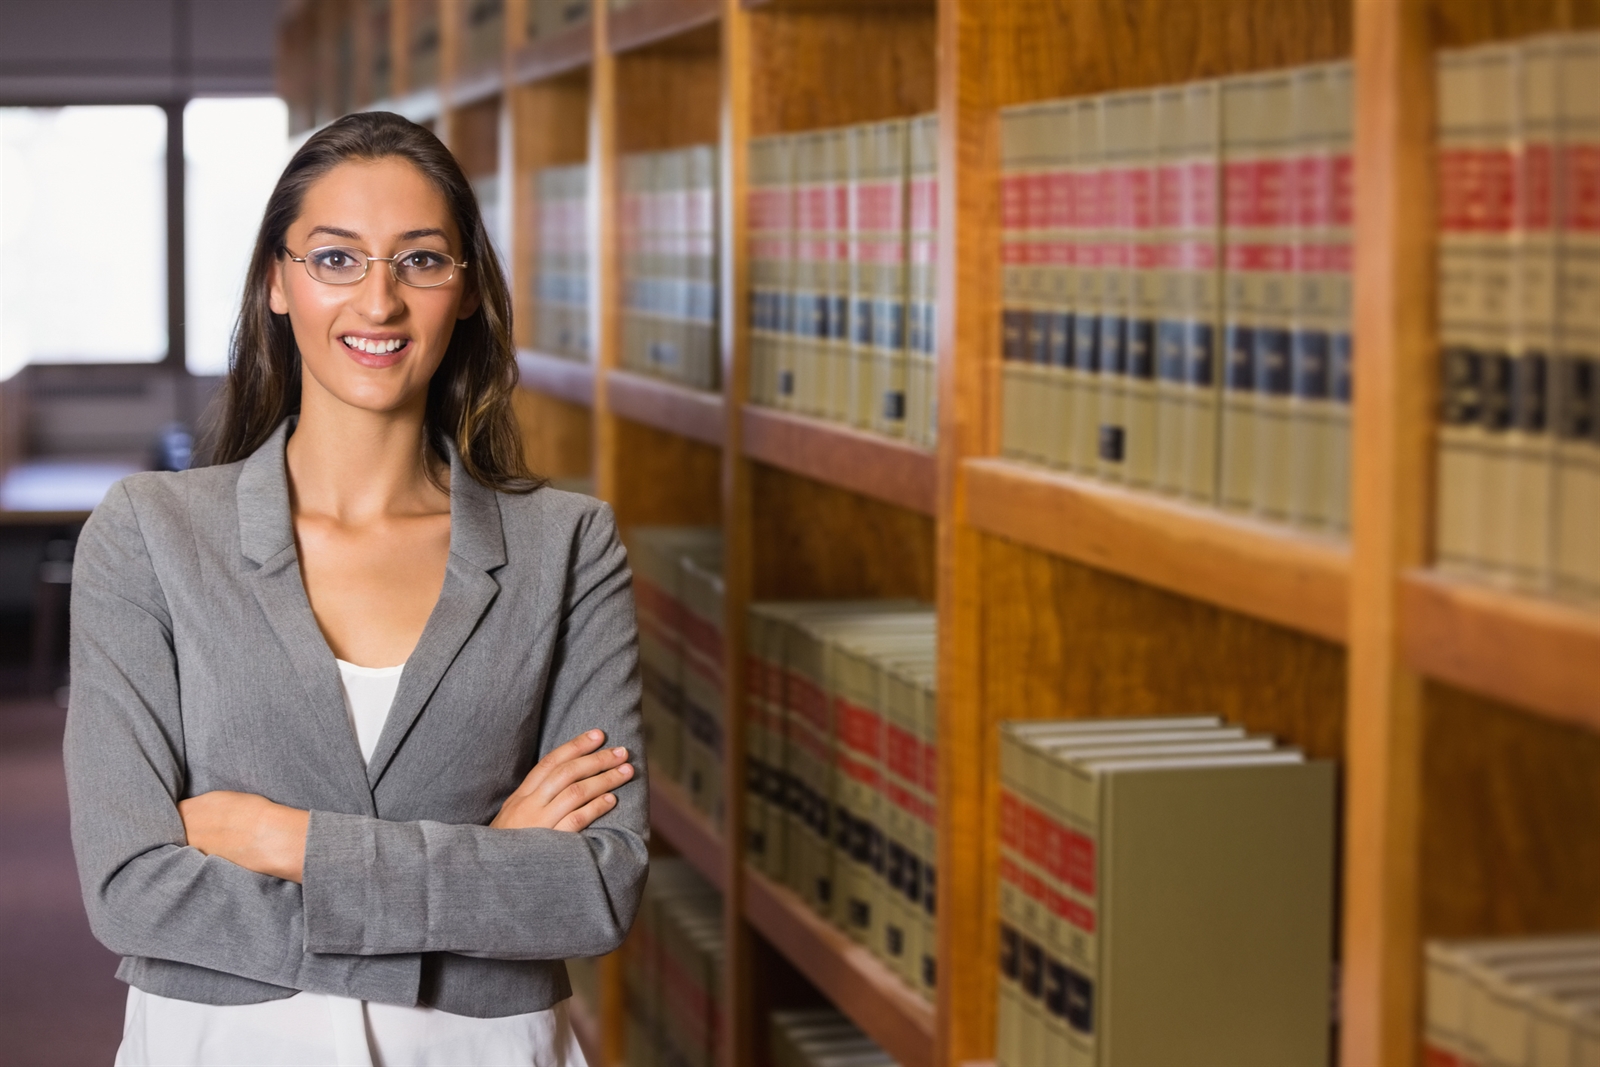 How to Qualify as a Lawyer in the UK after Studying a University Foundation Program